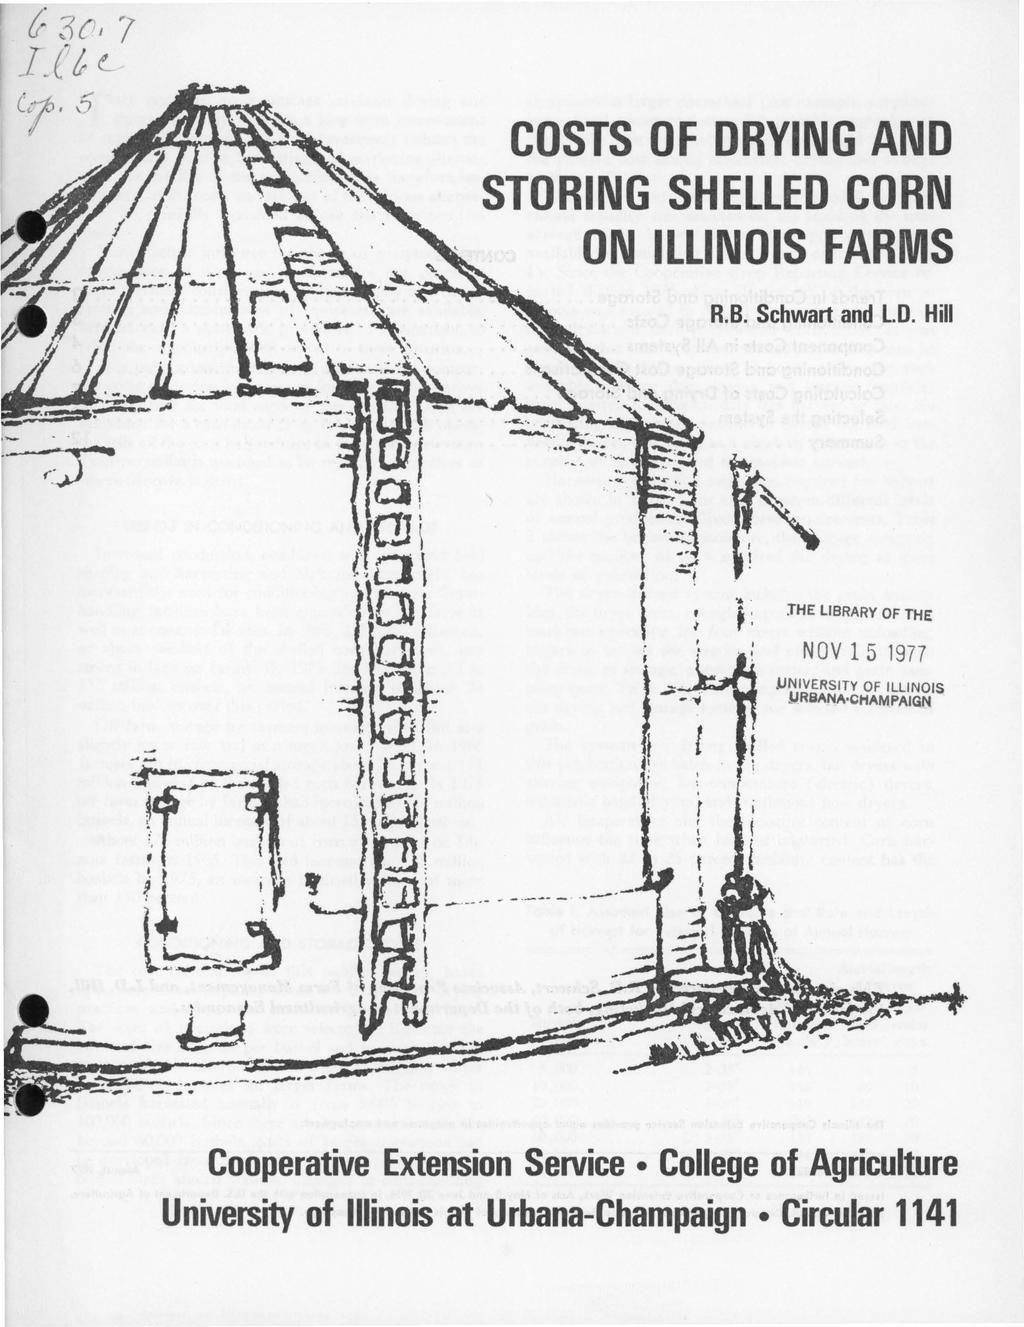 (; 3(1 1 7 I_(t e_ ct. 6 COSTS OF DRYING AND STORING SHELLED CORN ON ILLINOIS FARMS R.B. Schwart and L.D. Hill i ;,...., : JHE LIBRARY OF THE : NOV 1 5 1977 l.